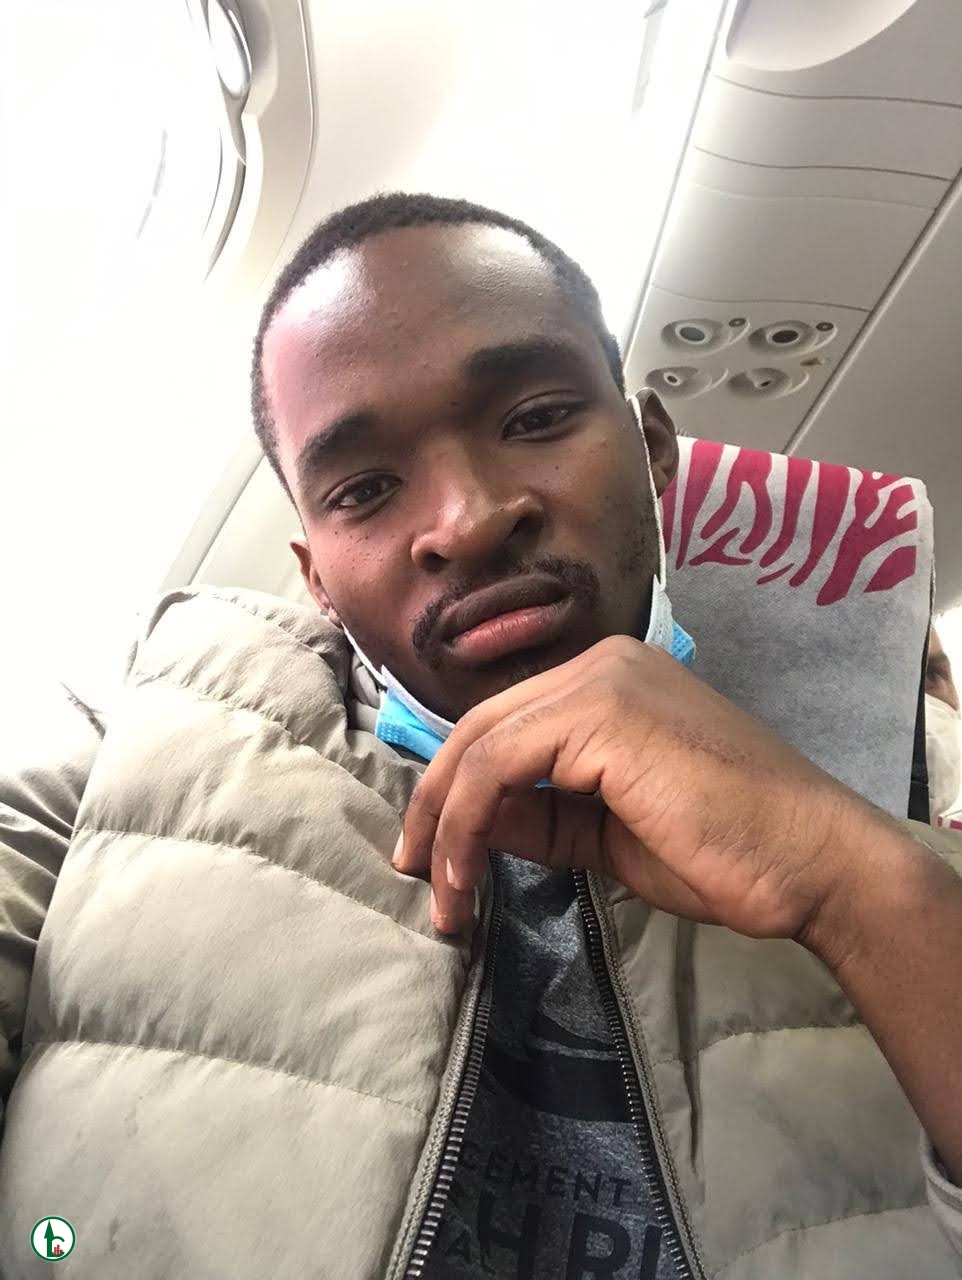 Mutilated bodies of Kenyan Twitter influencer and three of his friends found dumped in forest